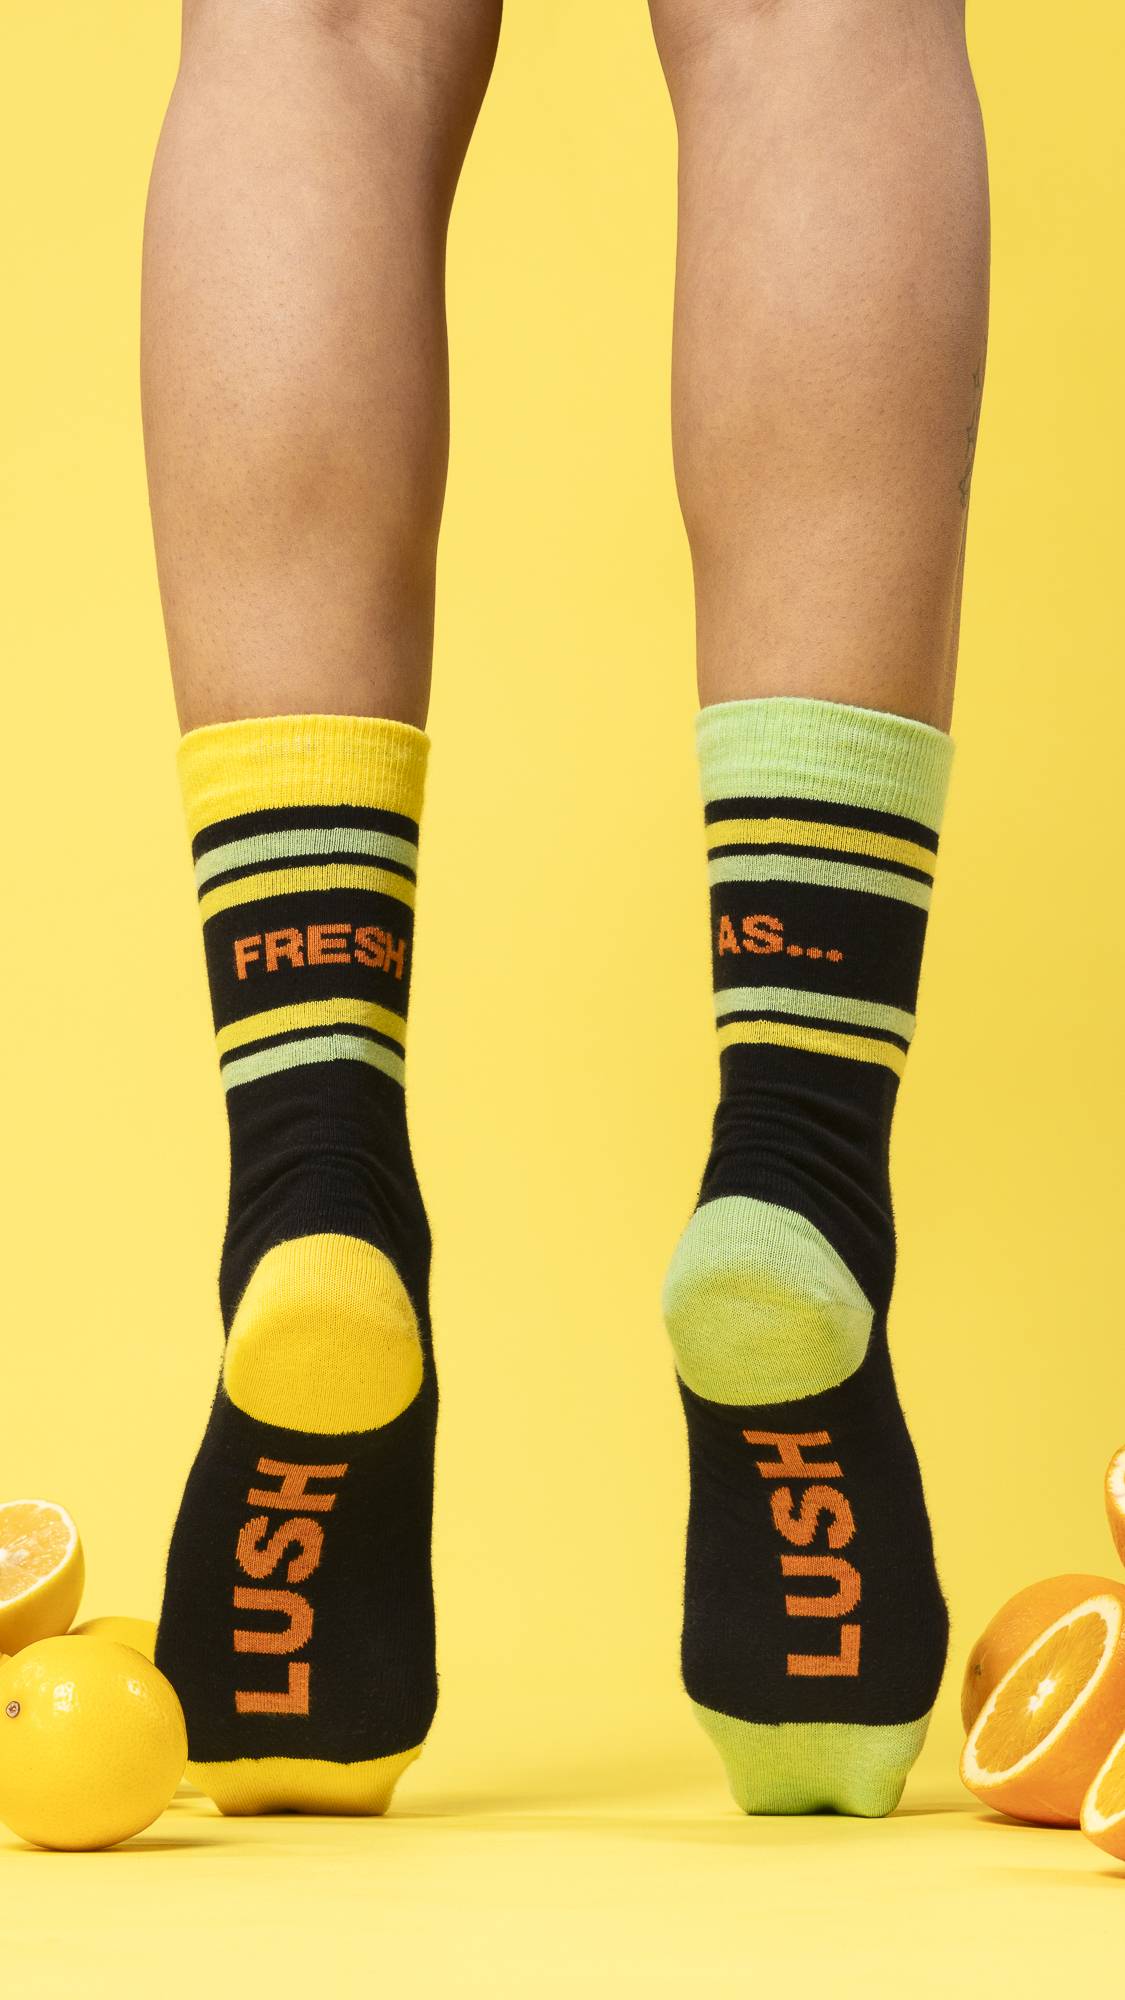 A shot of the model's calves down shows them standing on tip toes showing the Fresh Values socks, surrounded by citrus fruits. 